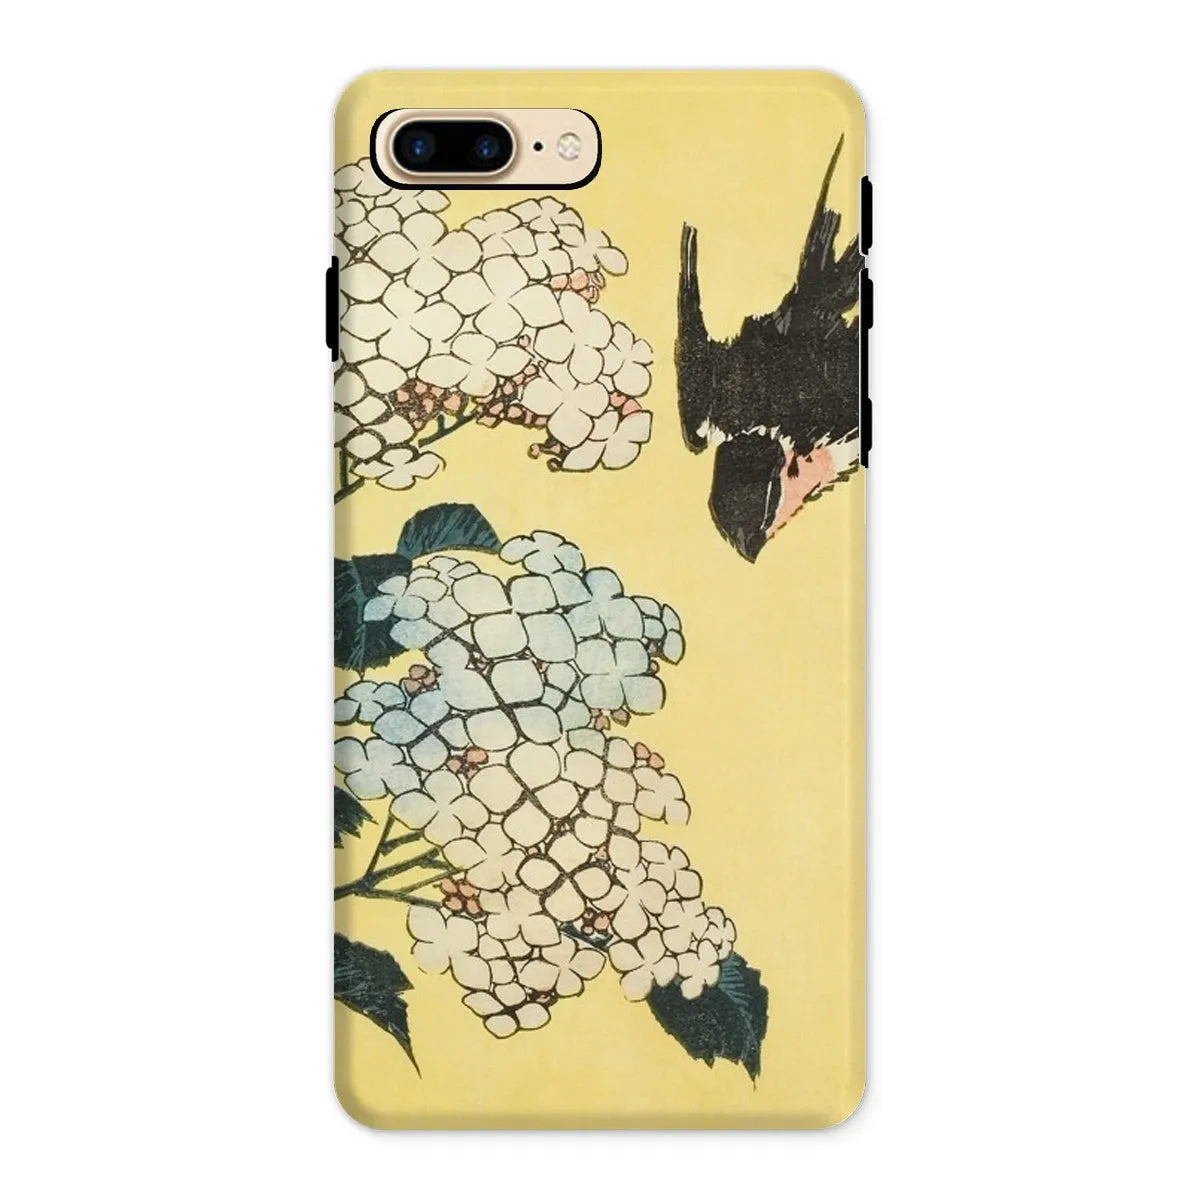 Hydrangea And Swallow - Japanese Art Phone Case - Hokusai - Iphone 8 Plus / Matte - Mobile Phone Cases - Aesthetic Art